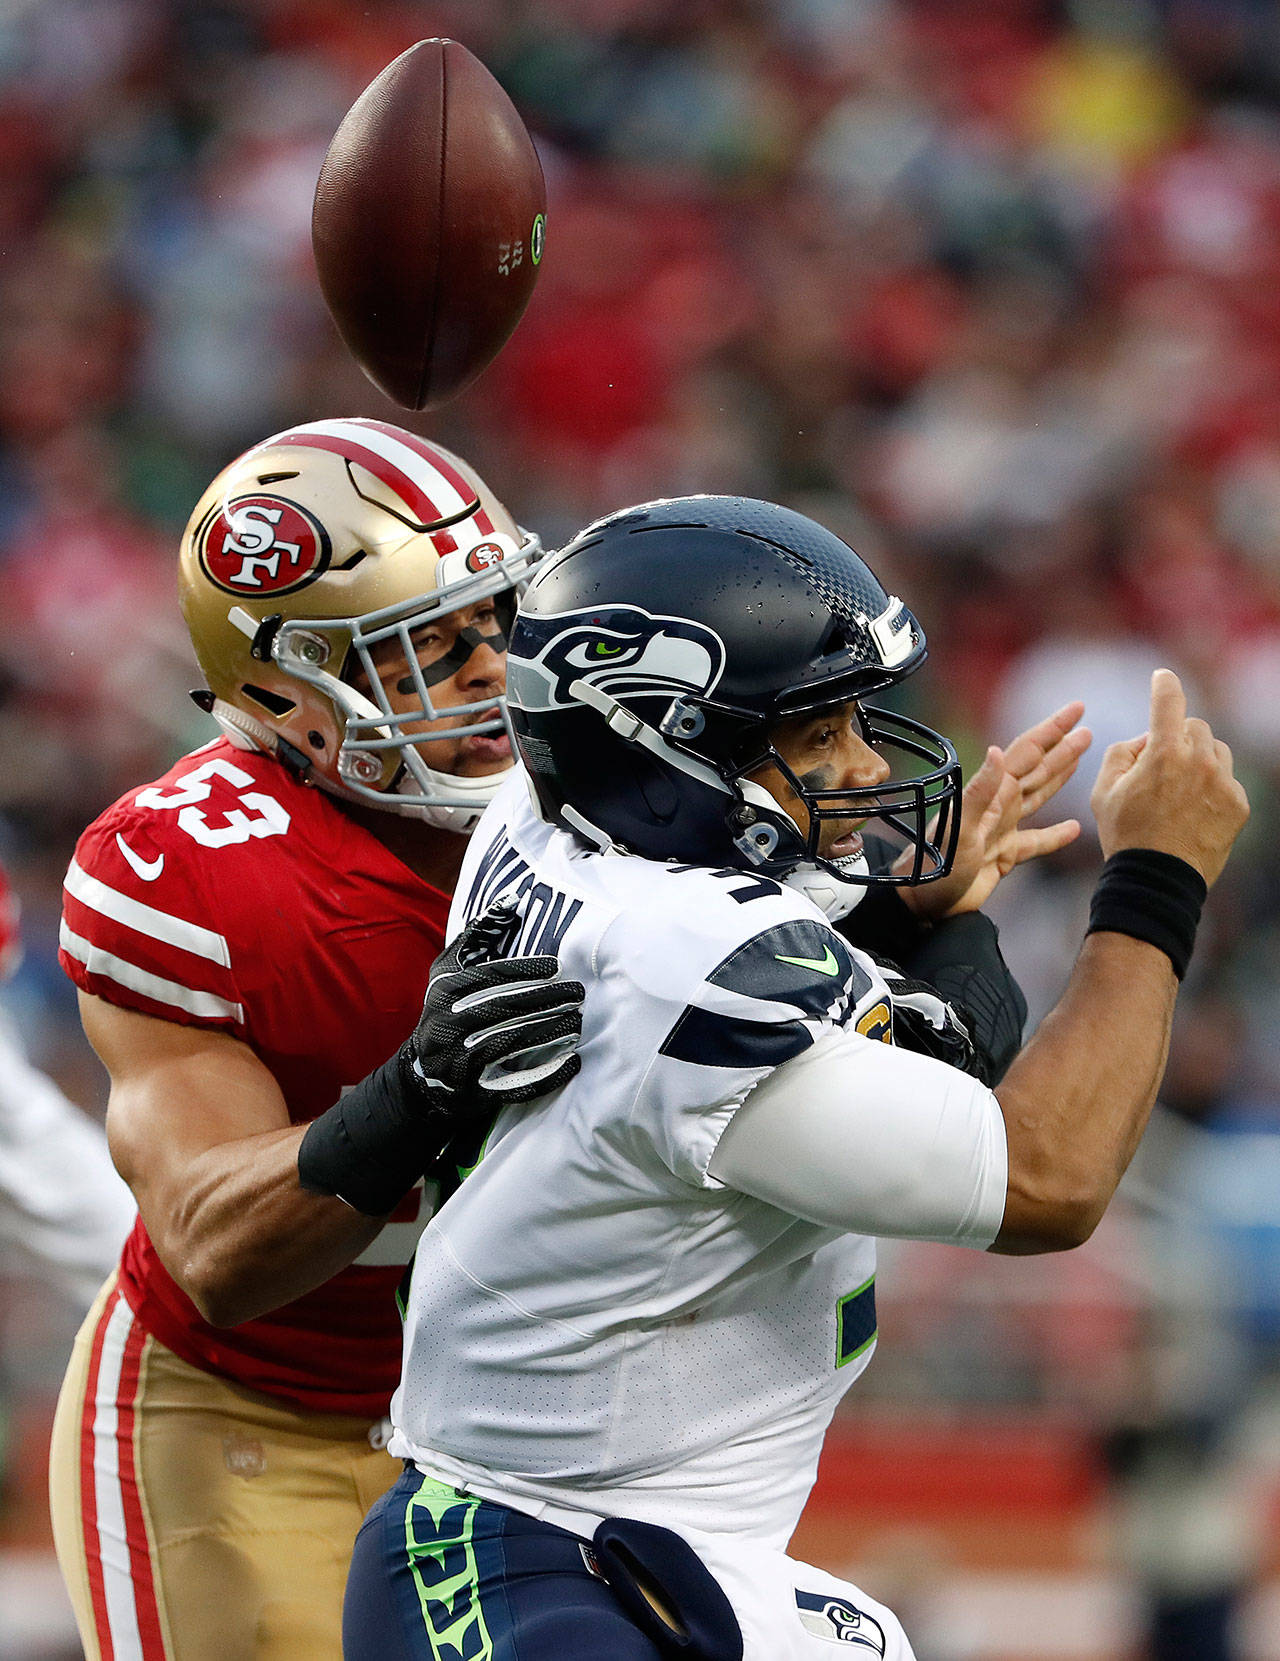 Seattle Seahawks quarterback Russell Wilson fumbles as he is sacked by San Francisco 49ers outside linebacker Mark Nzeocha (53) during the second half of Sunday’s game in Santa Clara, California. Wilson recovered the ball. (AP Photo/Tony Avelar)